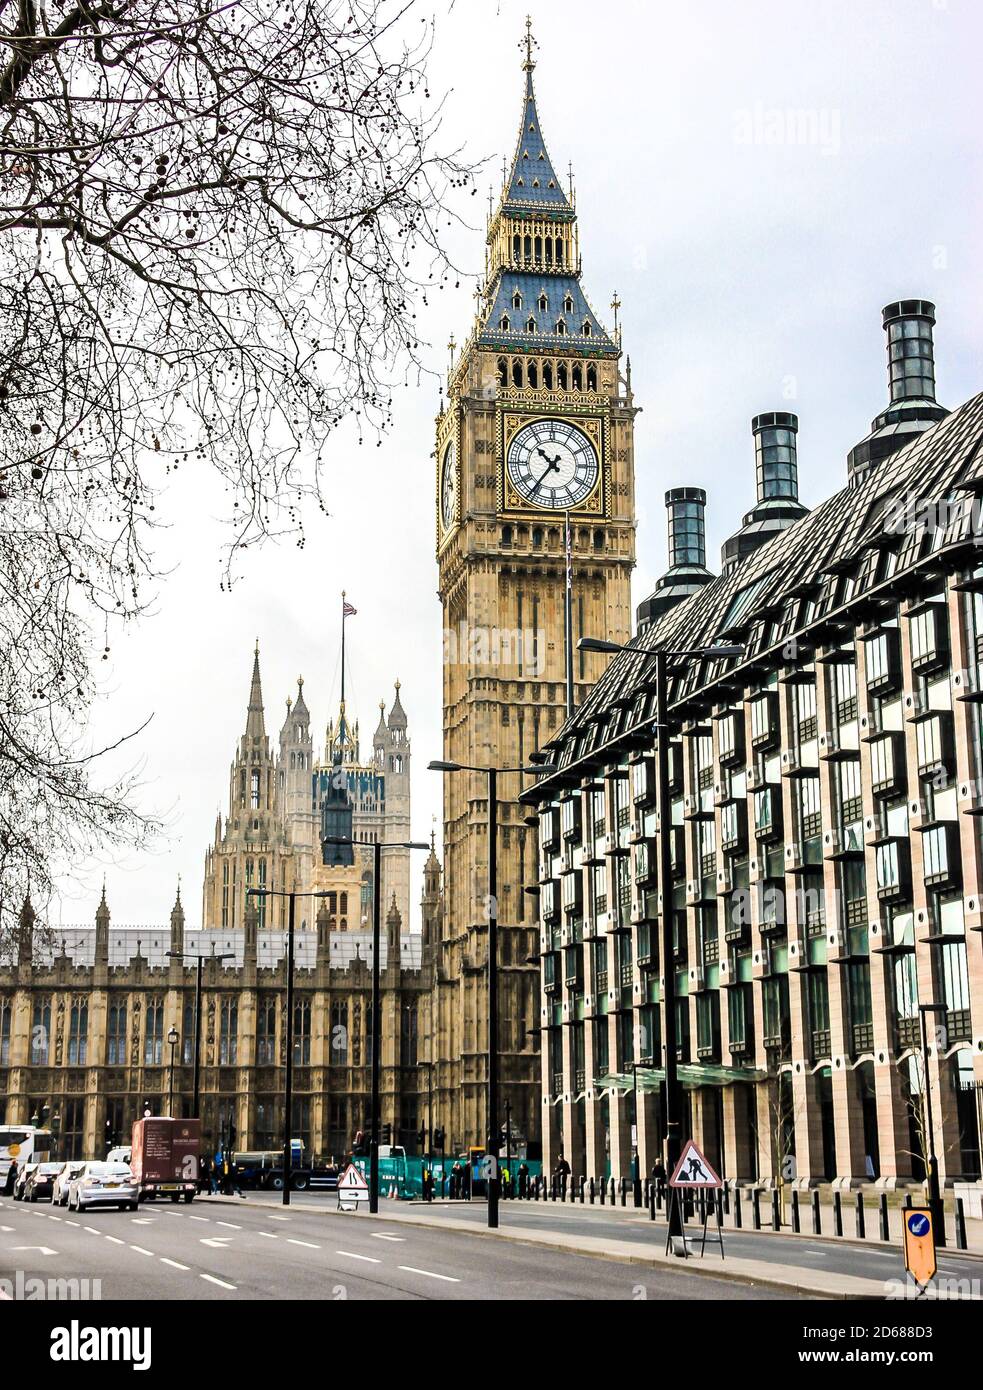 Big Ben (the Great Bell) of the striking clock at the north end of the Palace of Westminster in London, England Stock Photo